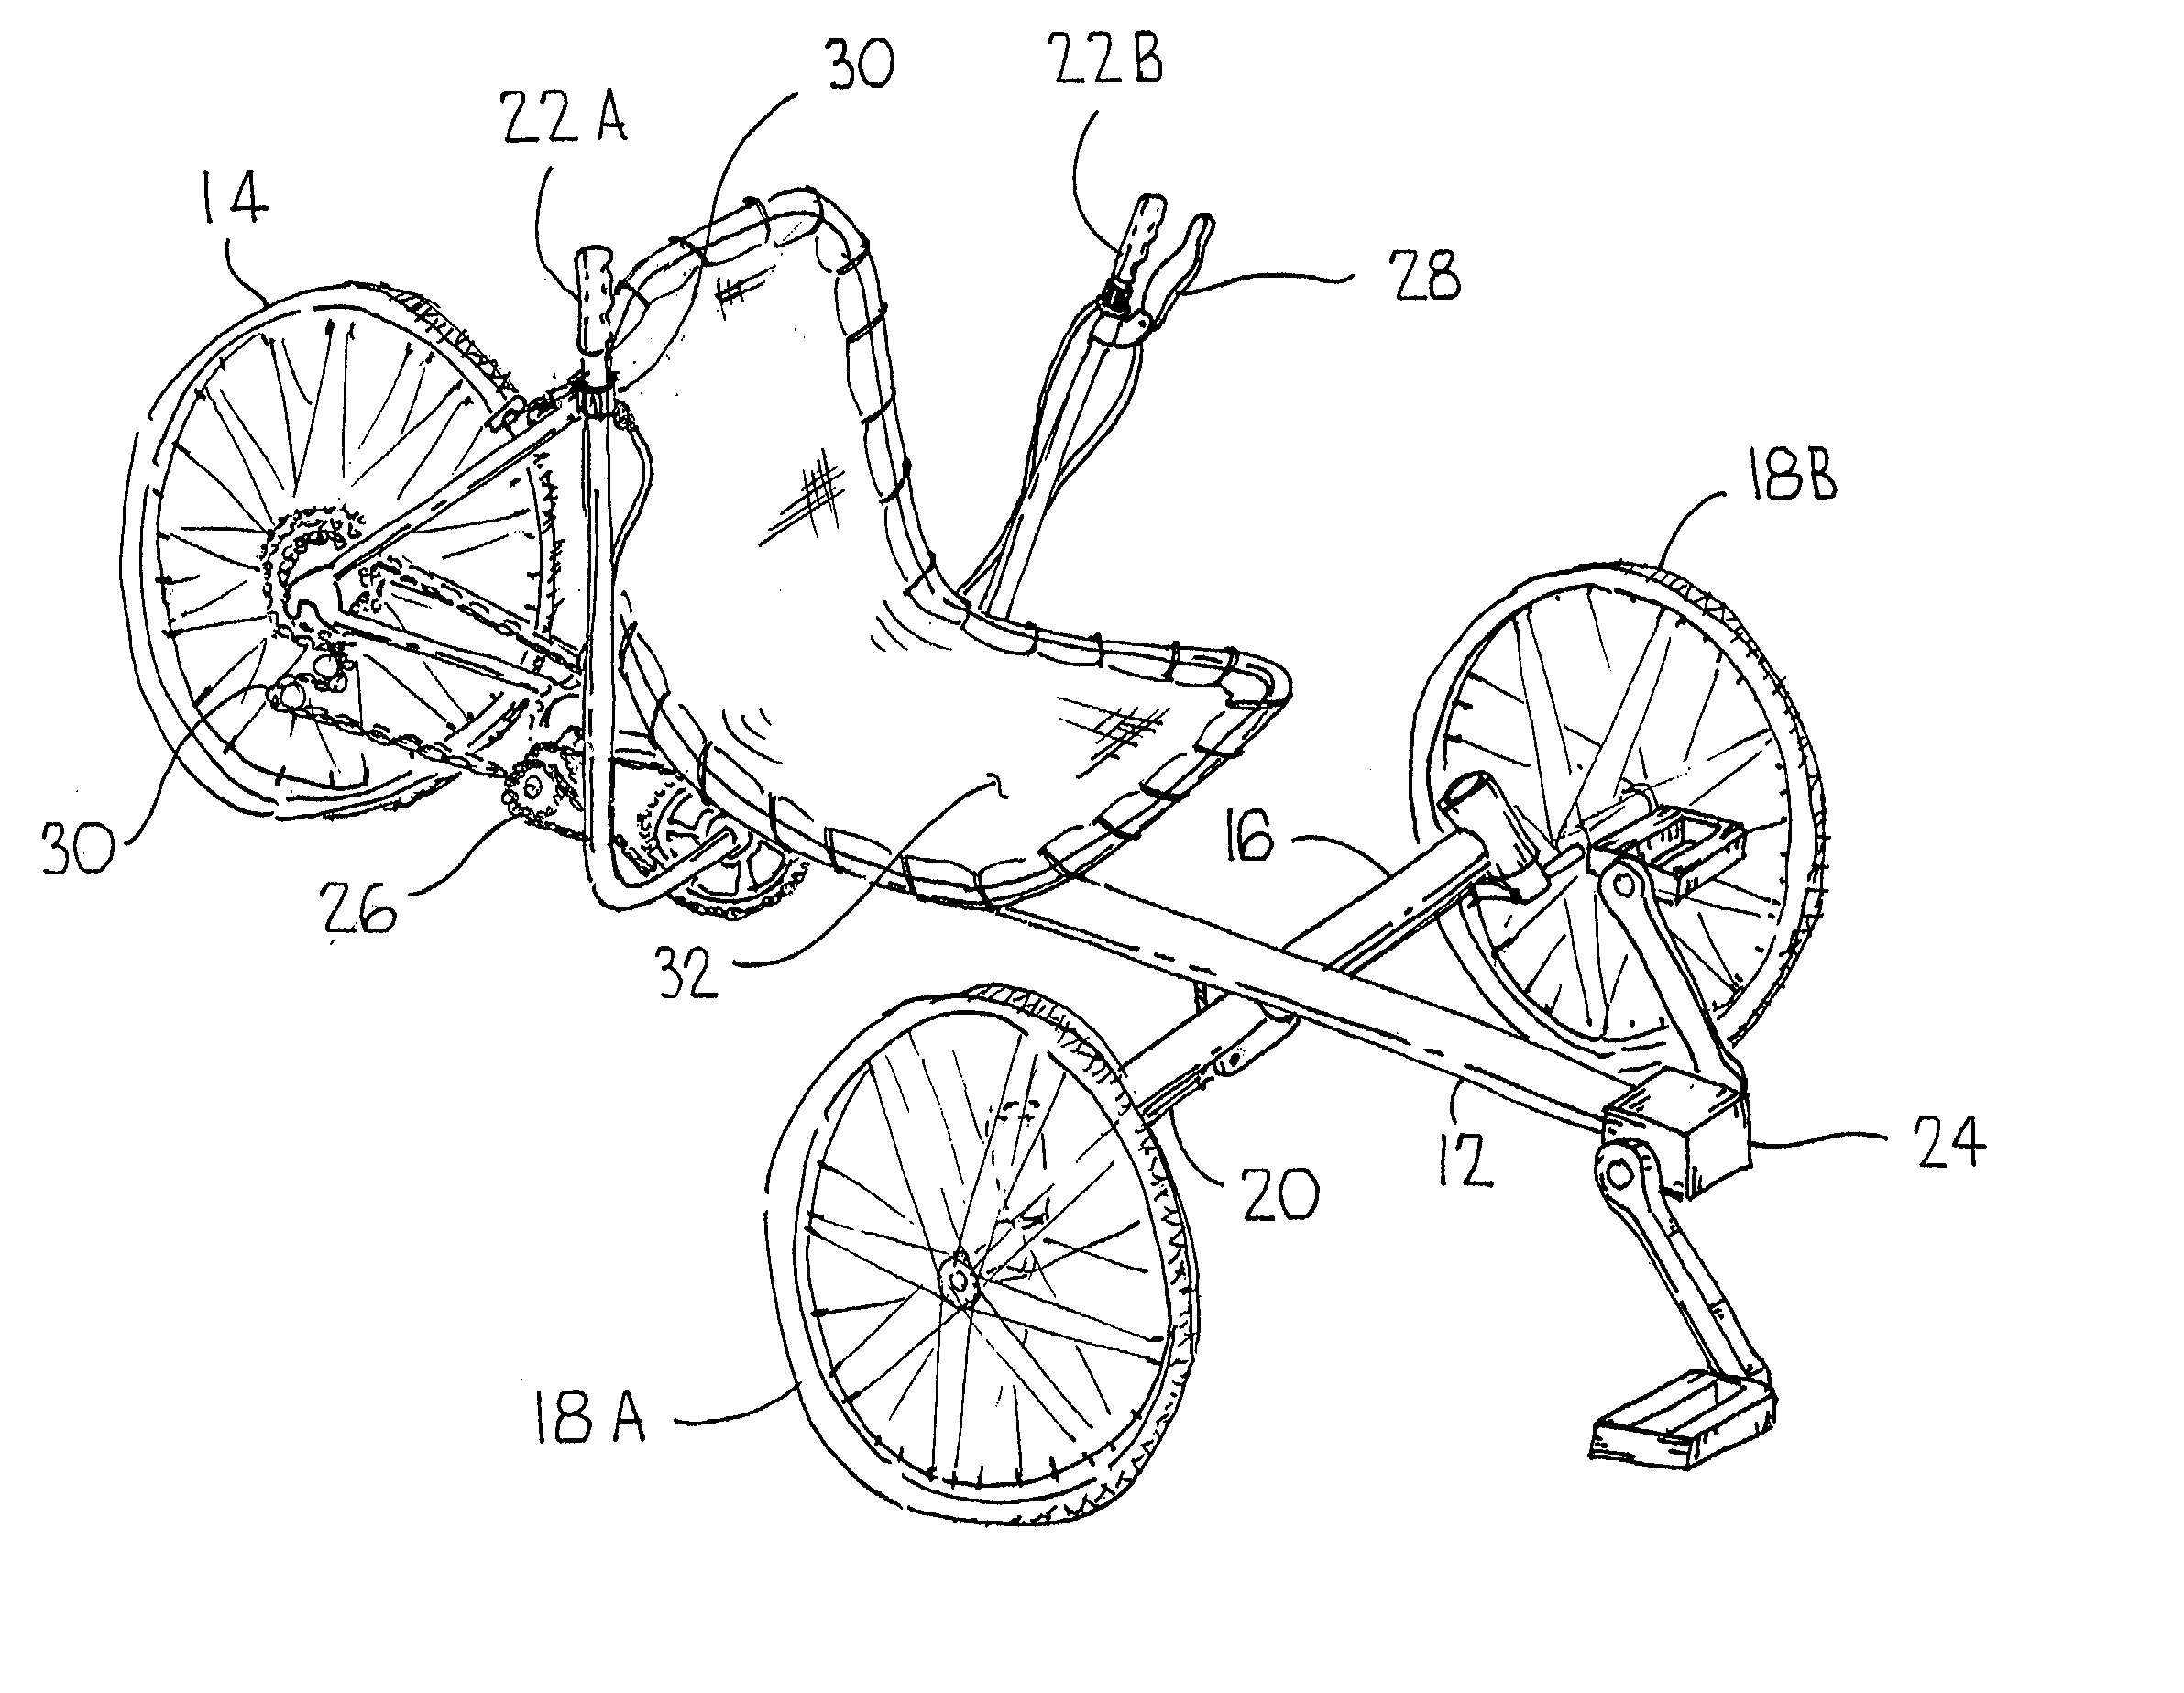 Human powered land vehicle combining use of legs and arms